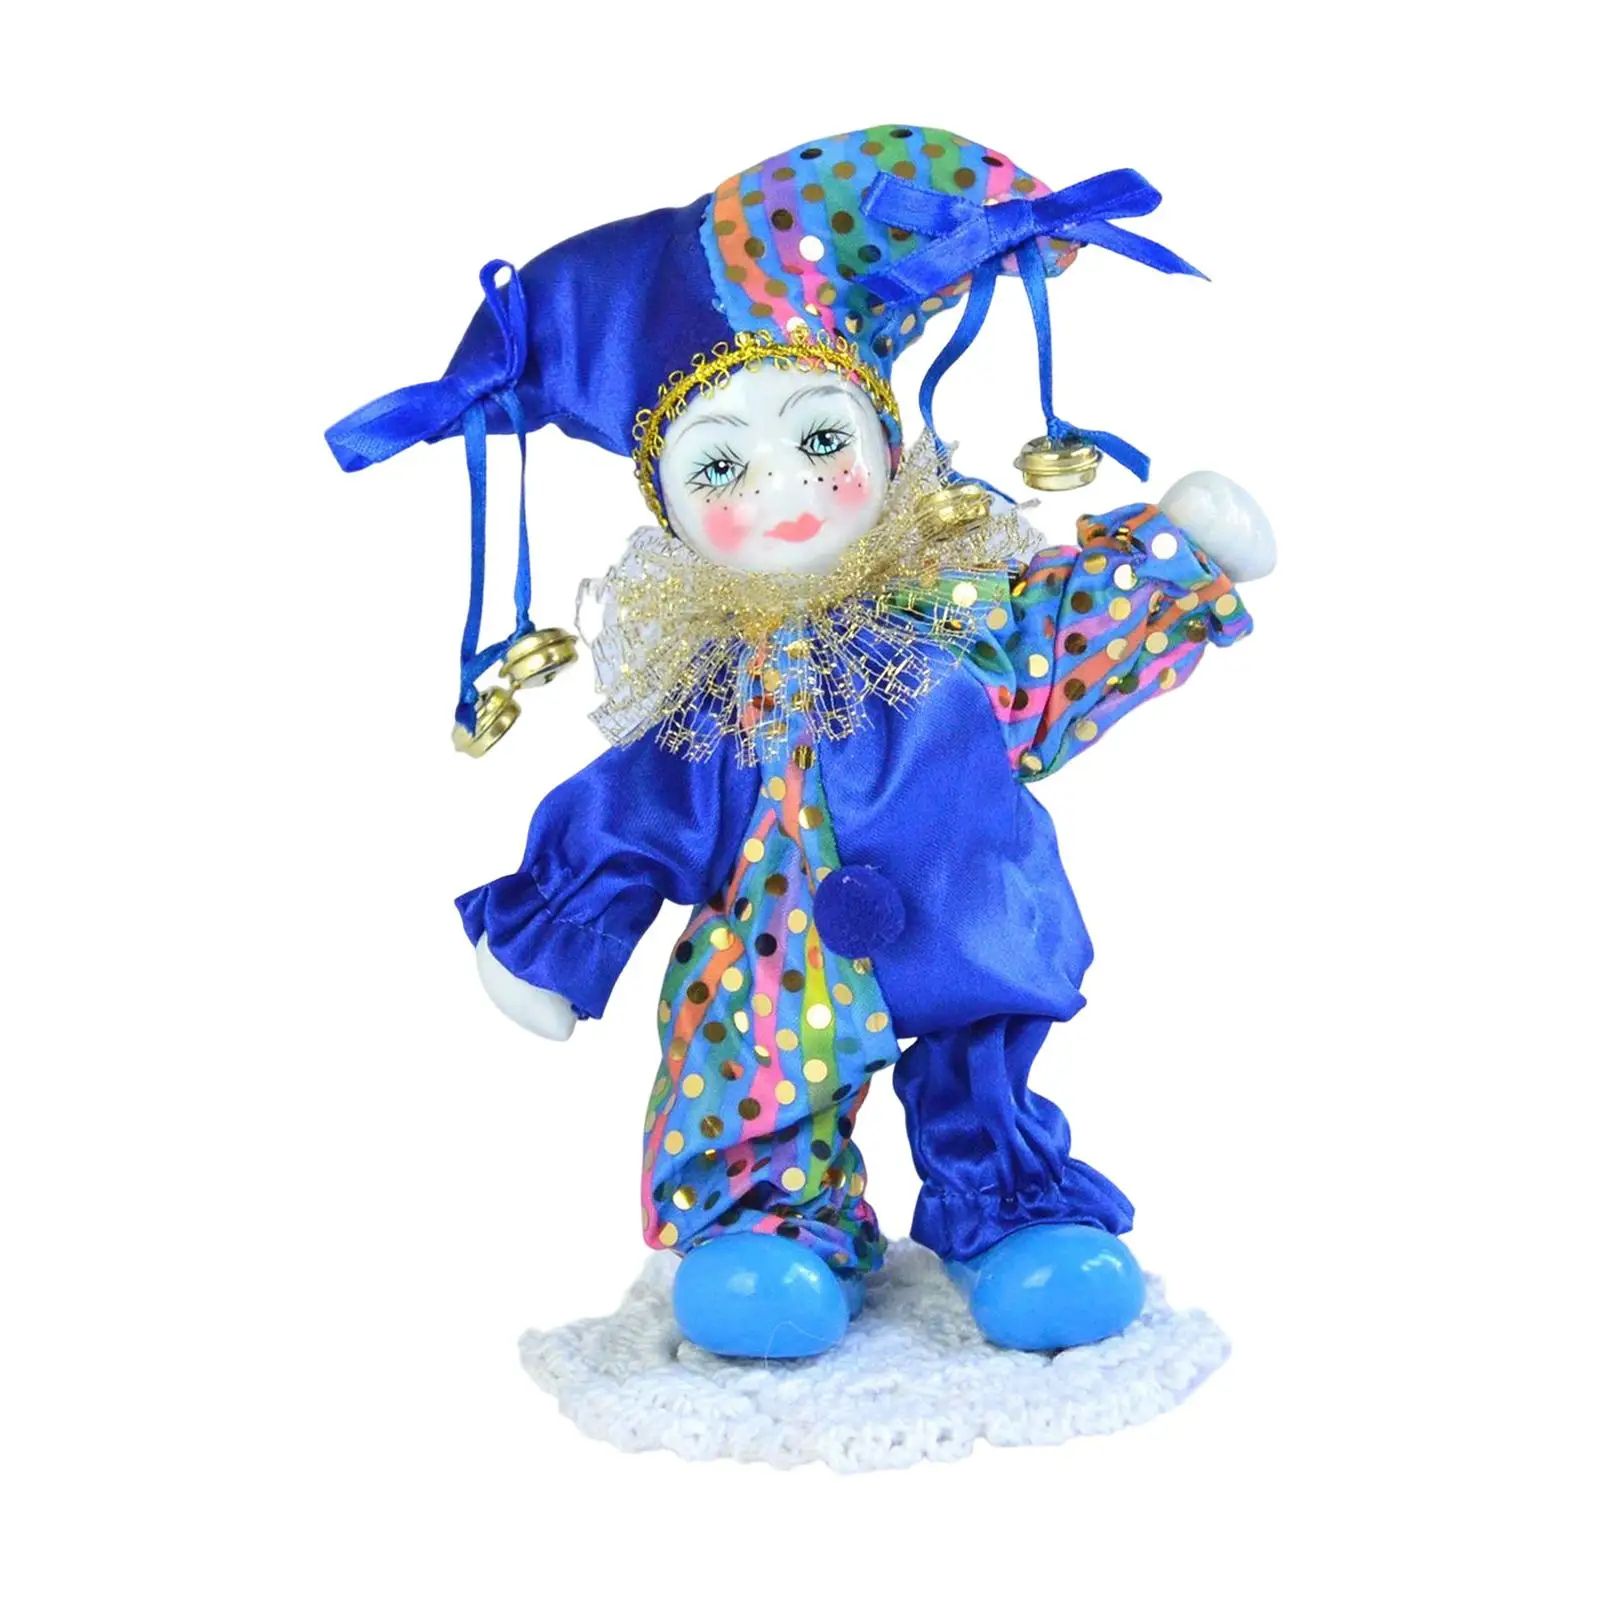 Clown Doll Desk Ornaments Home Decoration for Valentin Gift Collections